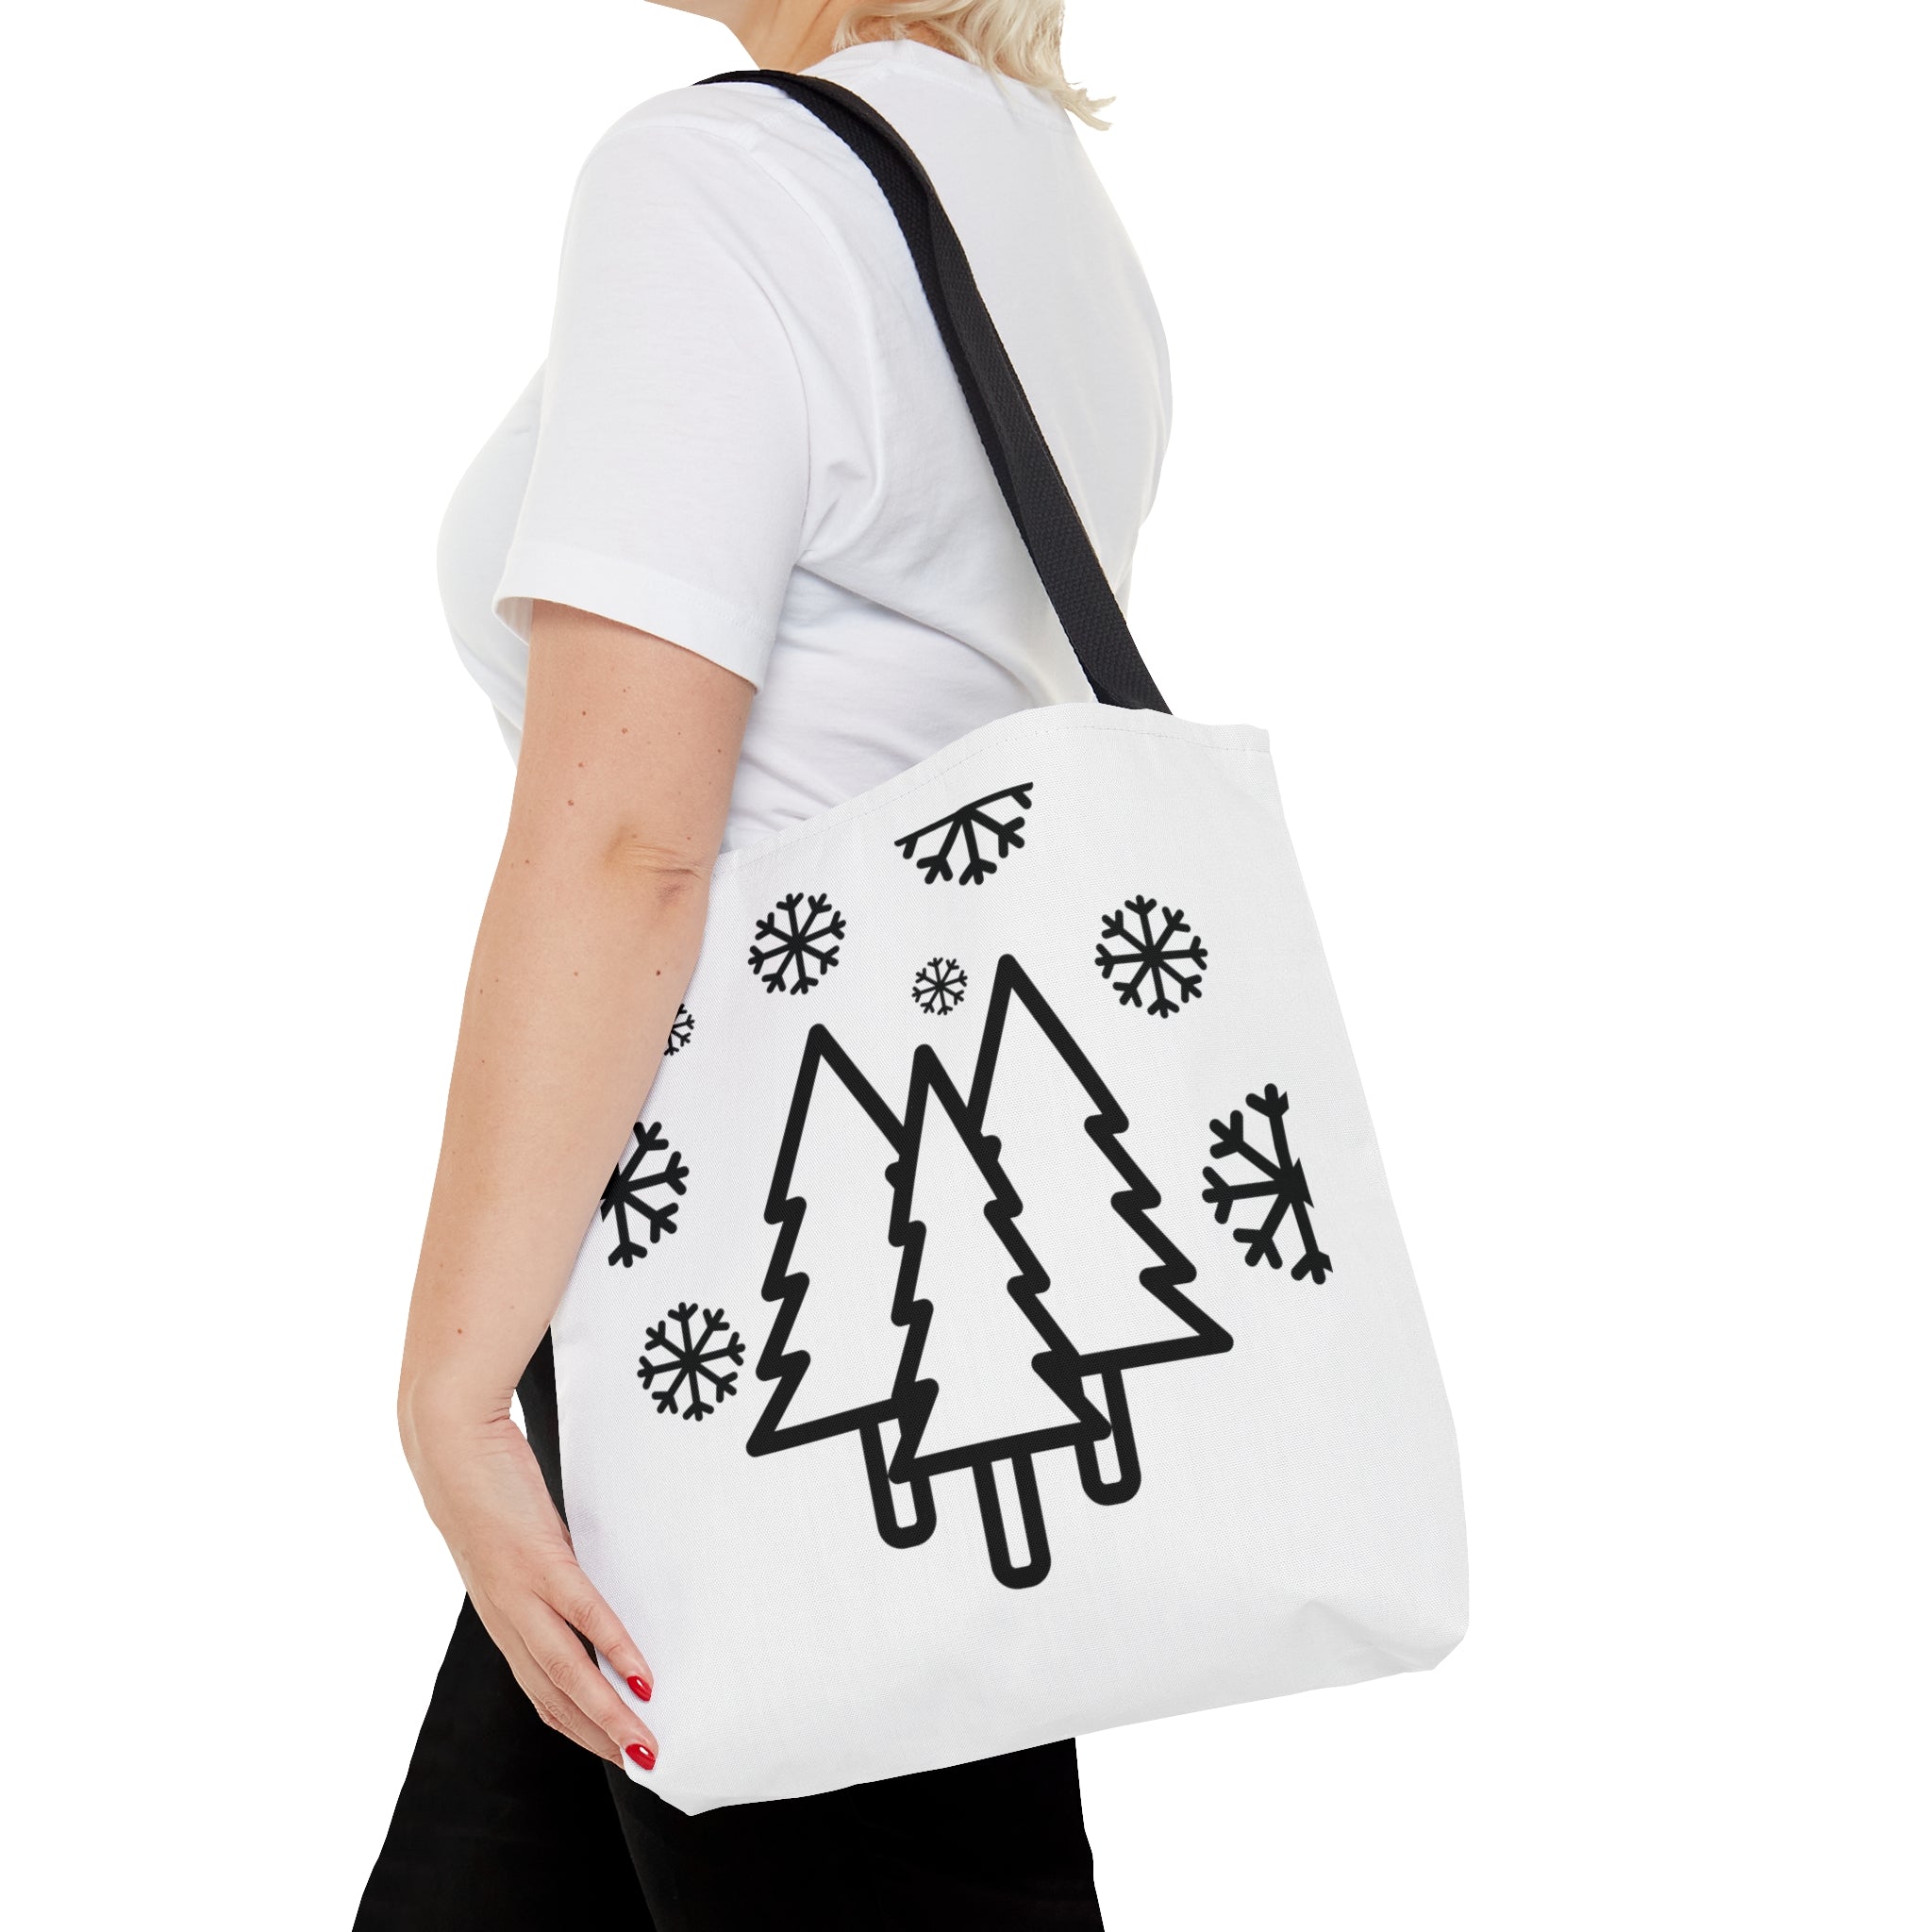 Christmas Tree Tote Bag, Reusable Canvas Tote Bags, Available in Different Size